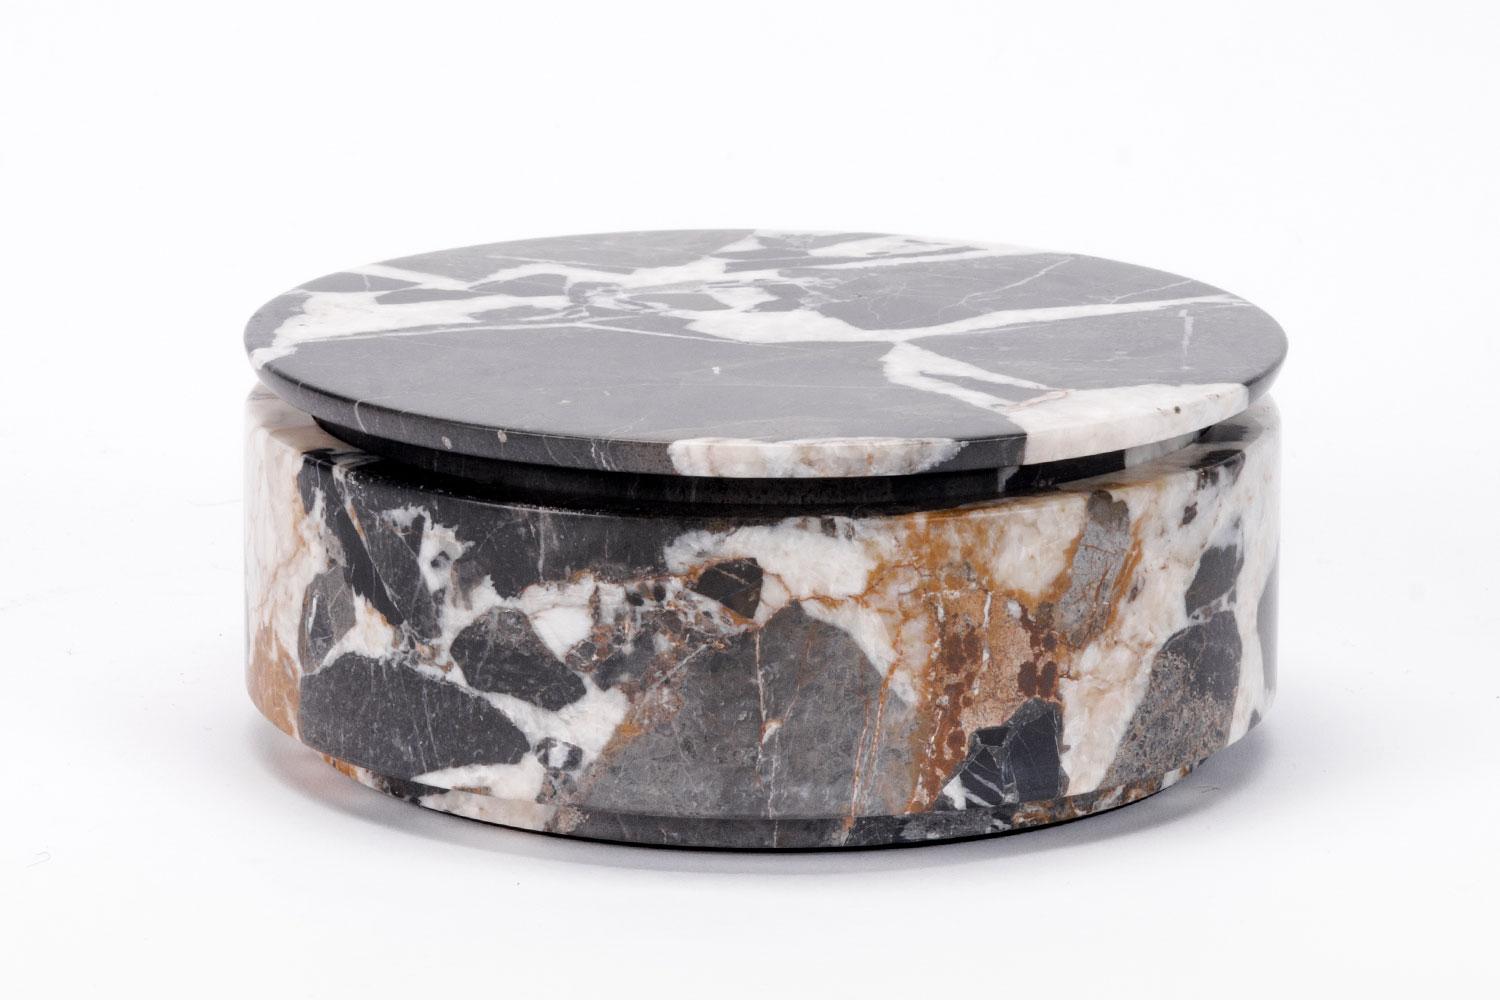 Patterned marble round flat box with engraved date + number hand carved by Gilles Caffier
 
Renowned for his unique and limited edition pieces, Gilles Caffier creates topical textures and transforms them into exquisite vases, lights and other